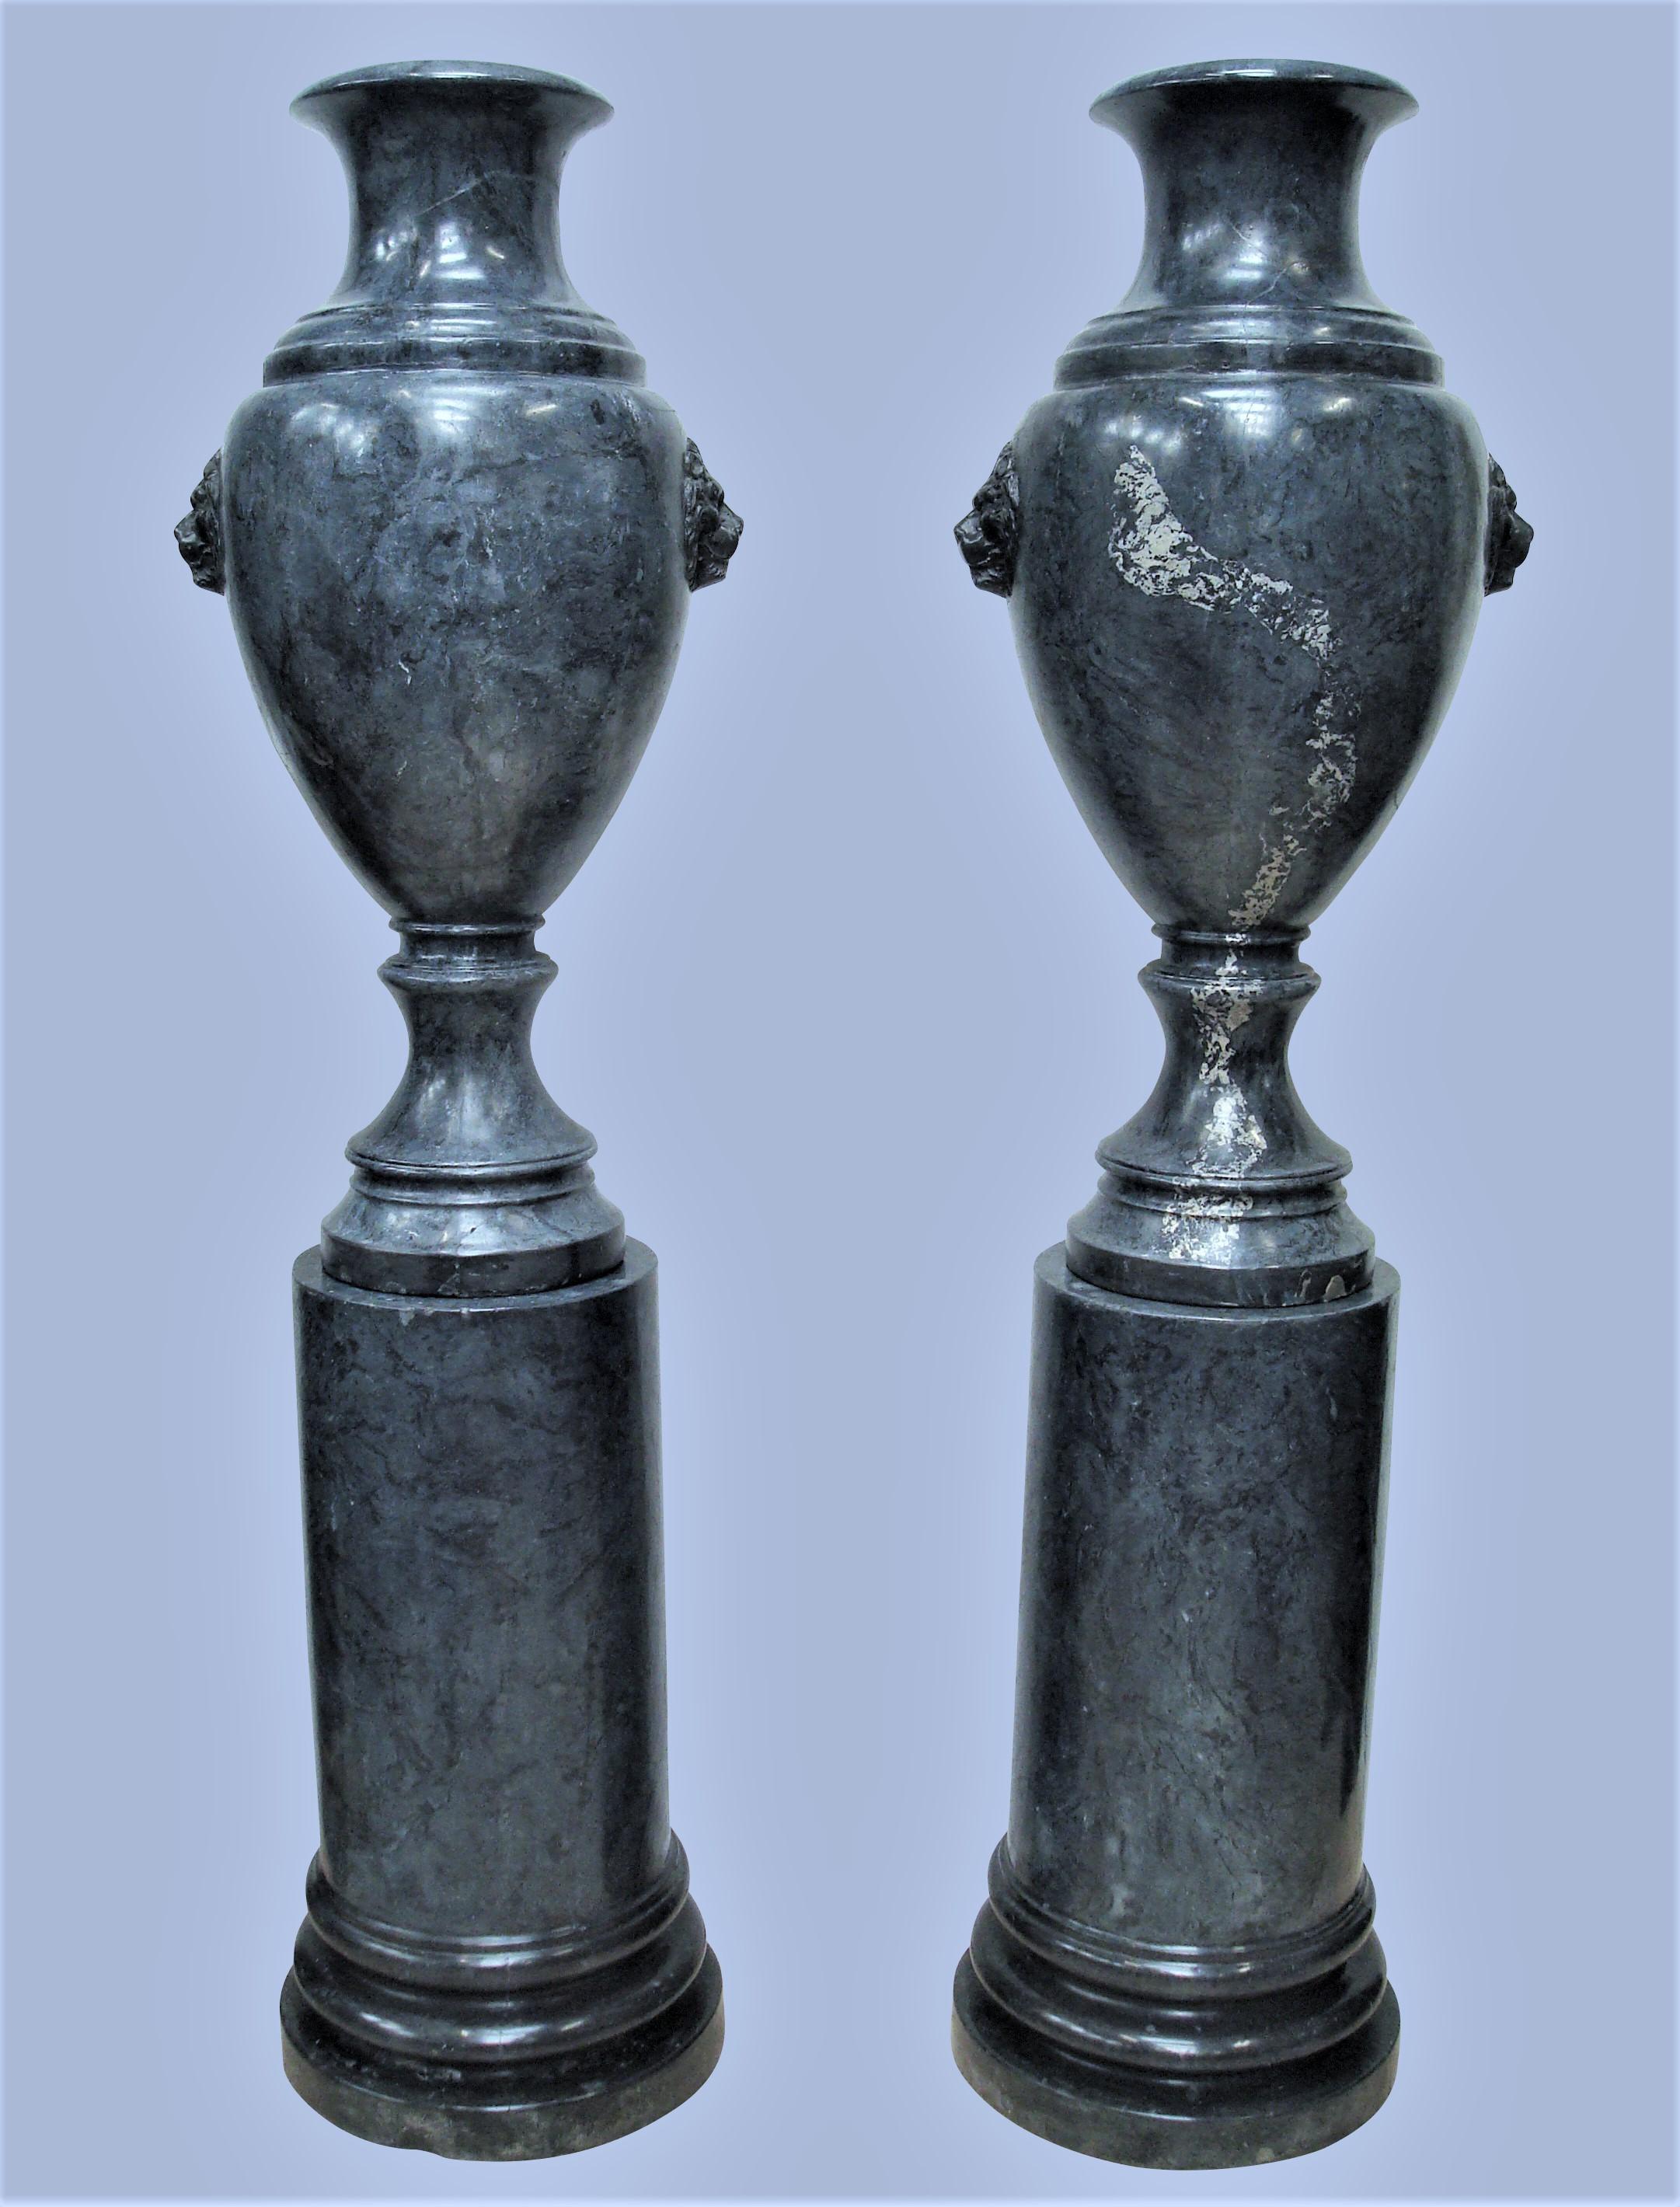 Early 20th Century Pair of Scagliola Urns on Pedestals For Sale 4